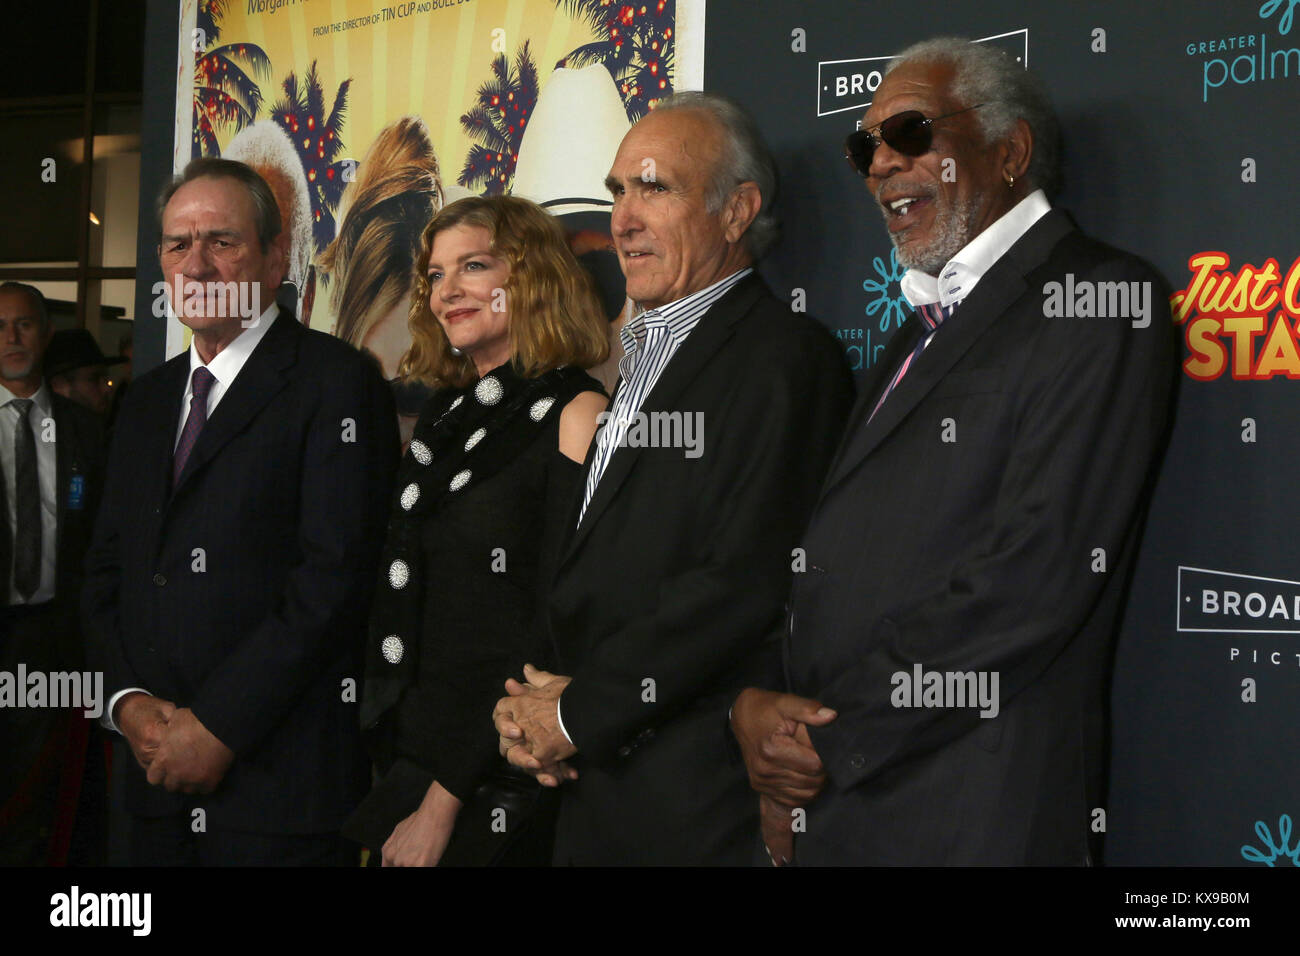 Premiere of 'Just Getting Started' at ArcLight Hollywood - Arrivals  Featuring: Tommy Lee Jones, Rene Russo, Ron Shelton, Morgan Free Where: Los Angeles, California, United States When: 07 Dec 2017 Credit: Nicky Nelson/WENN.com Stock Photo